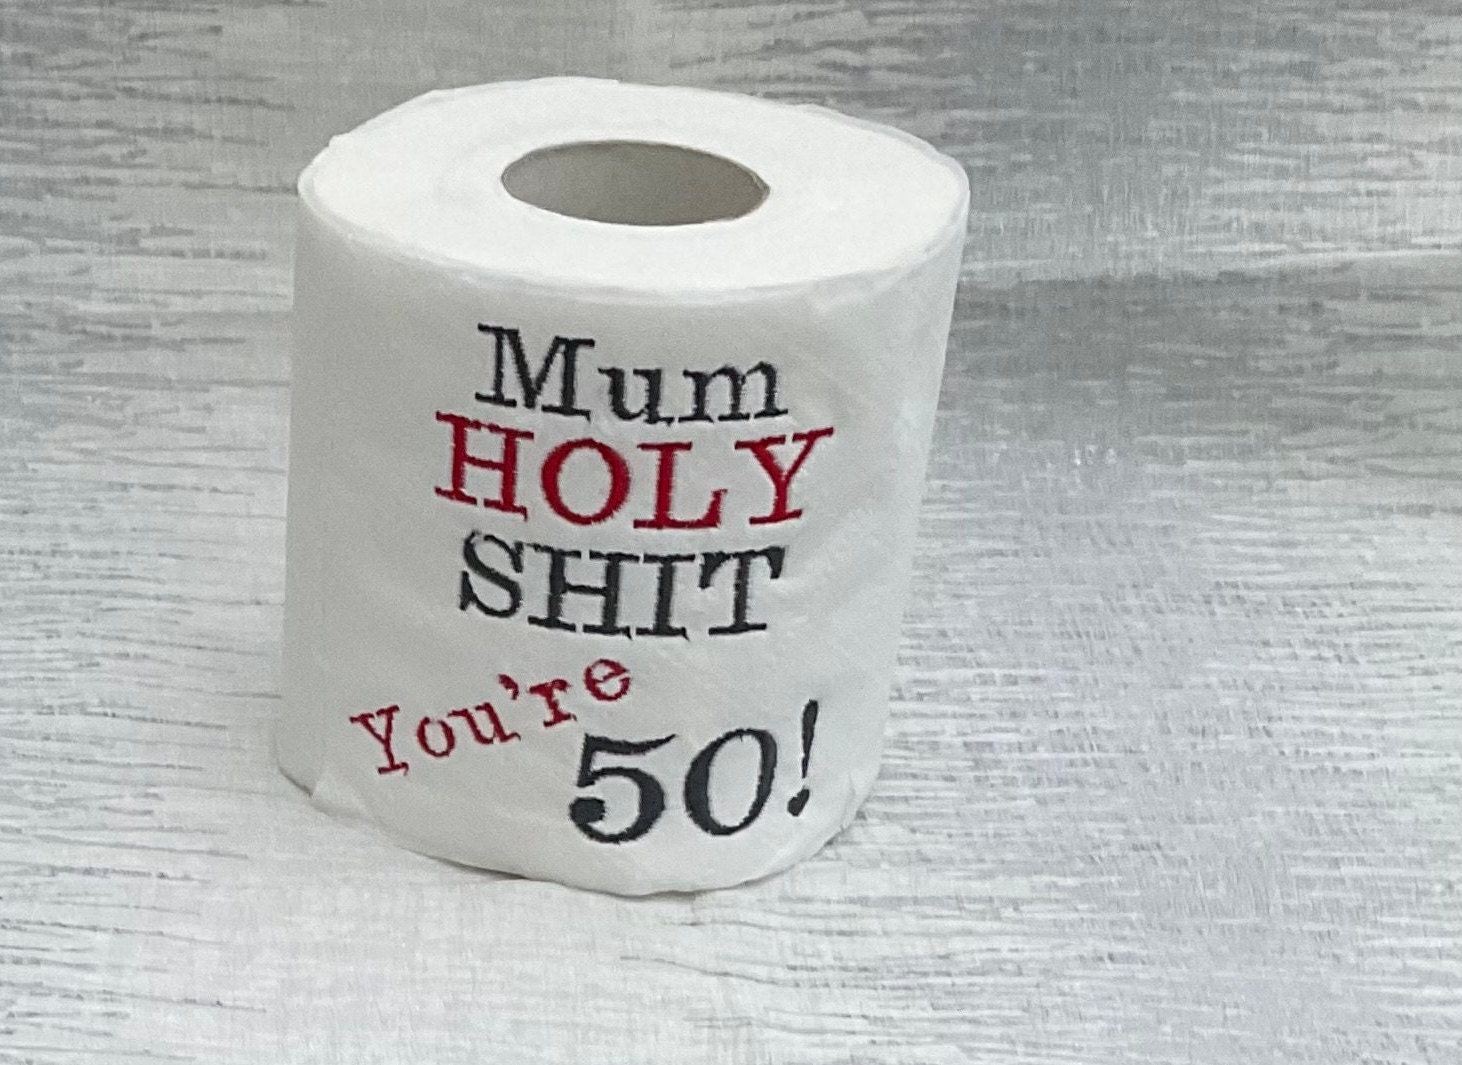 Over the Hill Toilet Paper - Funny Gag Gifts for Men & Old People -  Birthday Party Supplies for 40th, 50th, 60th, 70th - Novelty Toilet Roll  Joke